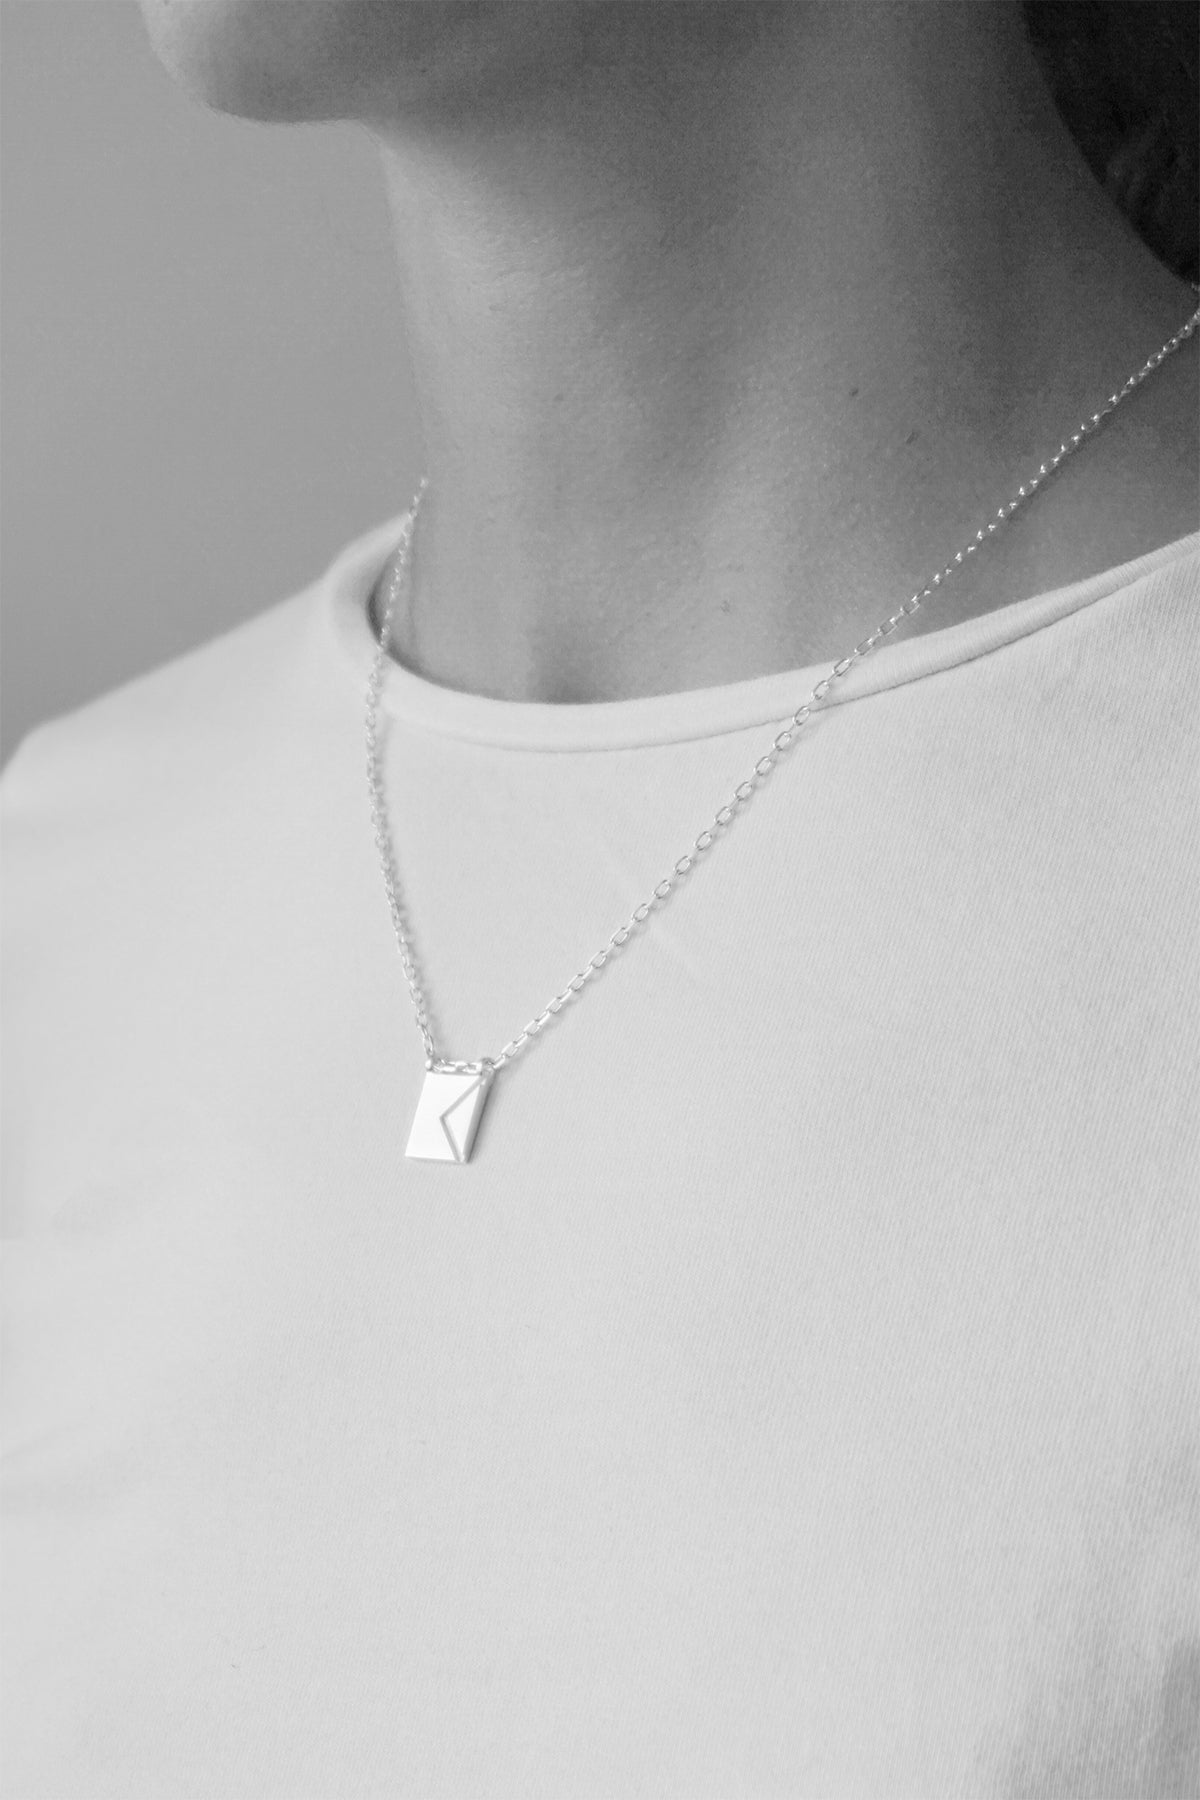 Welcome our Initial Necklaces